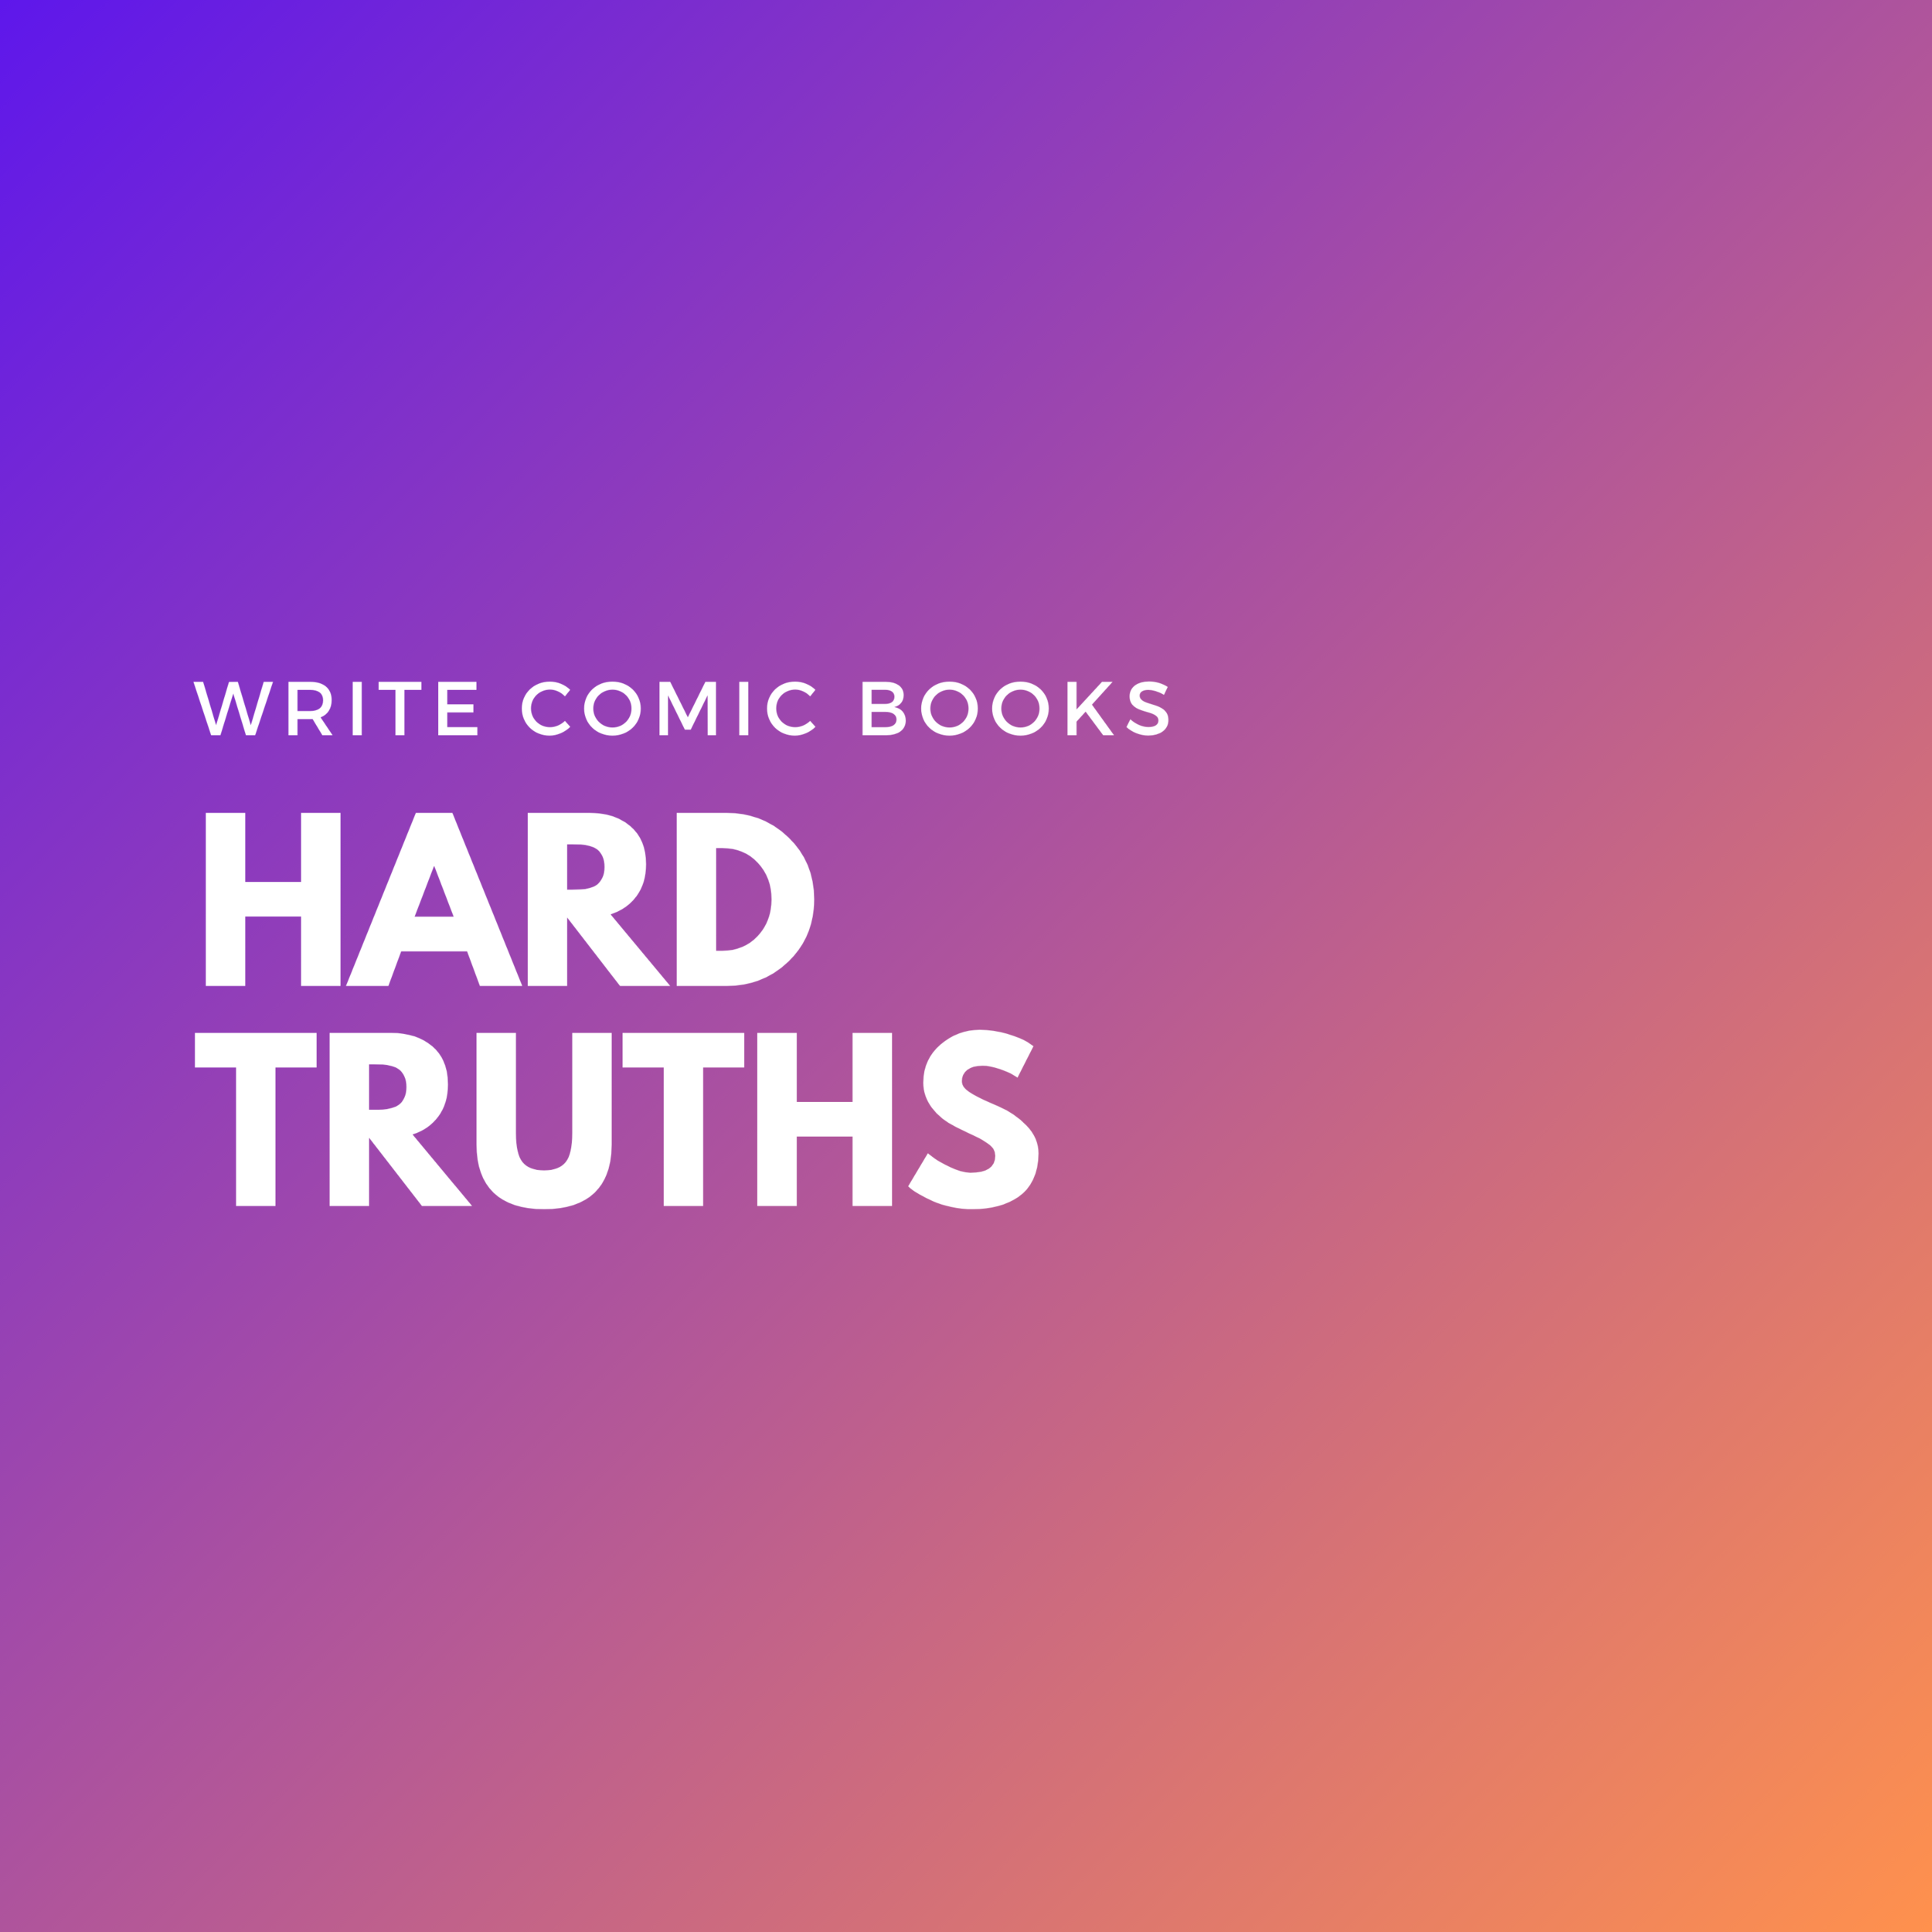 Hard Truths About Writing Comics